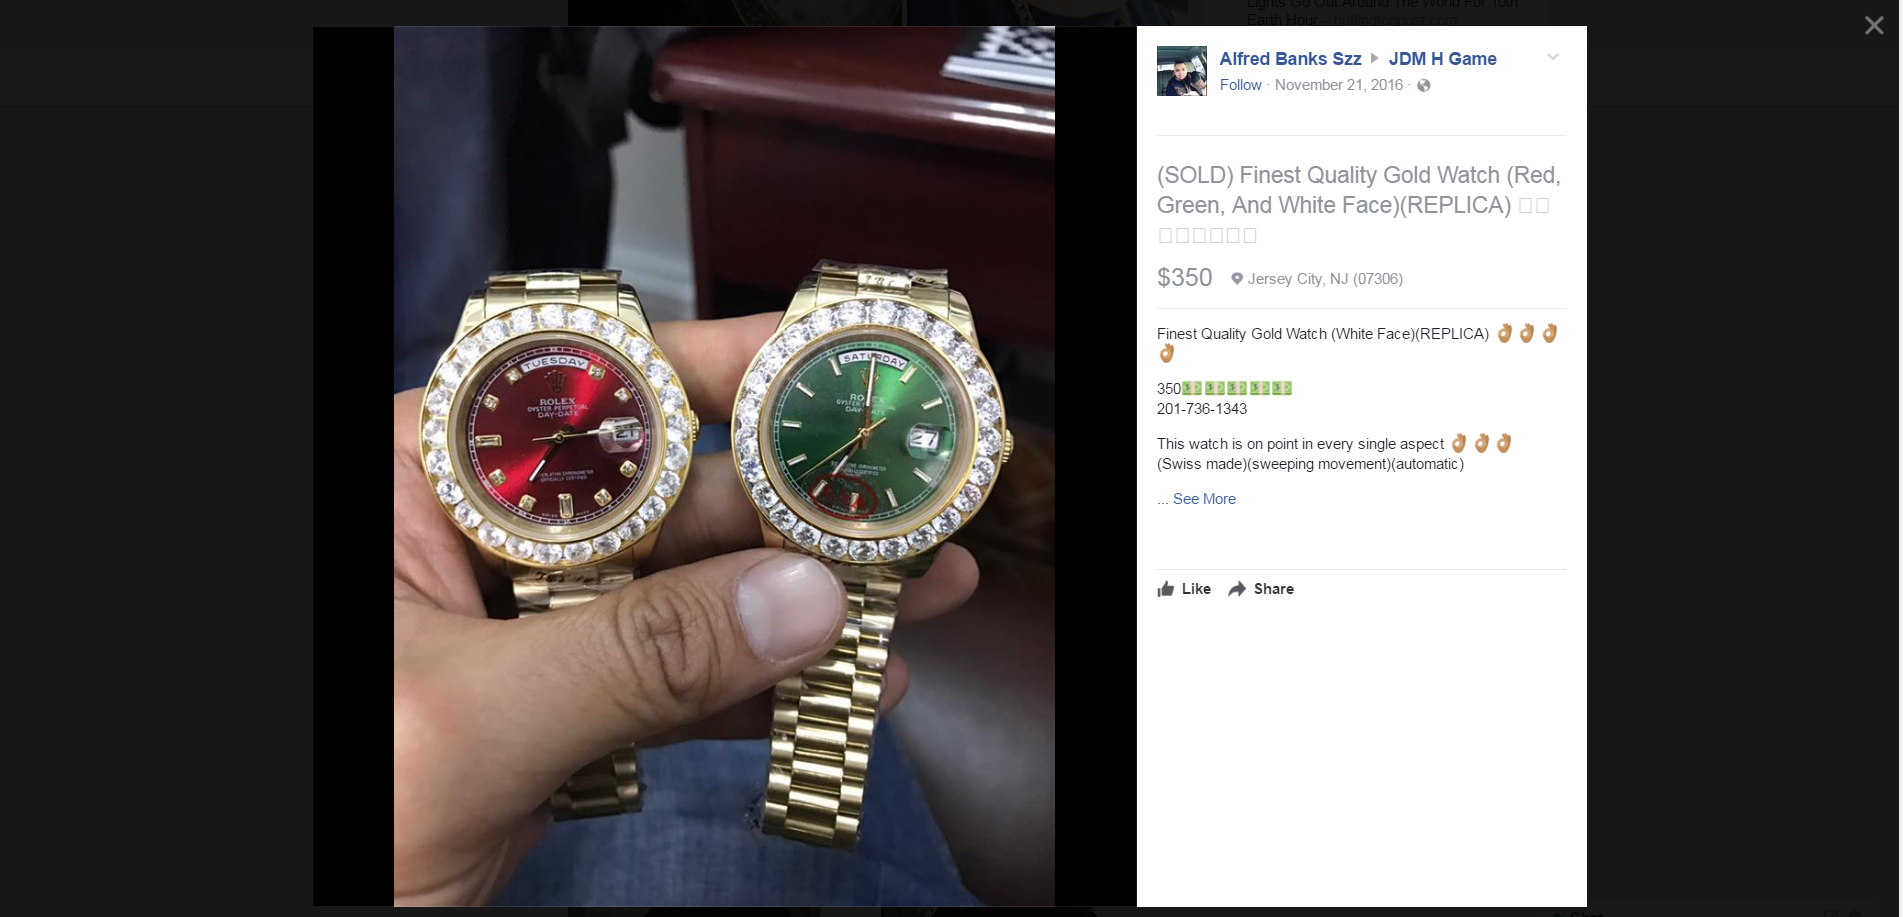 | This is one of his Facebook ads for a sold counterfeit Rolex replica watch for $350. |